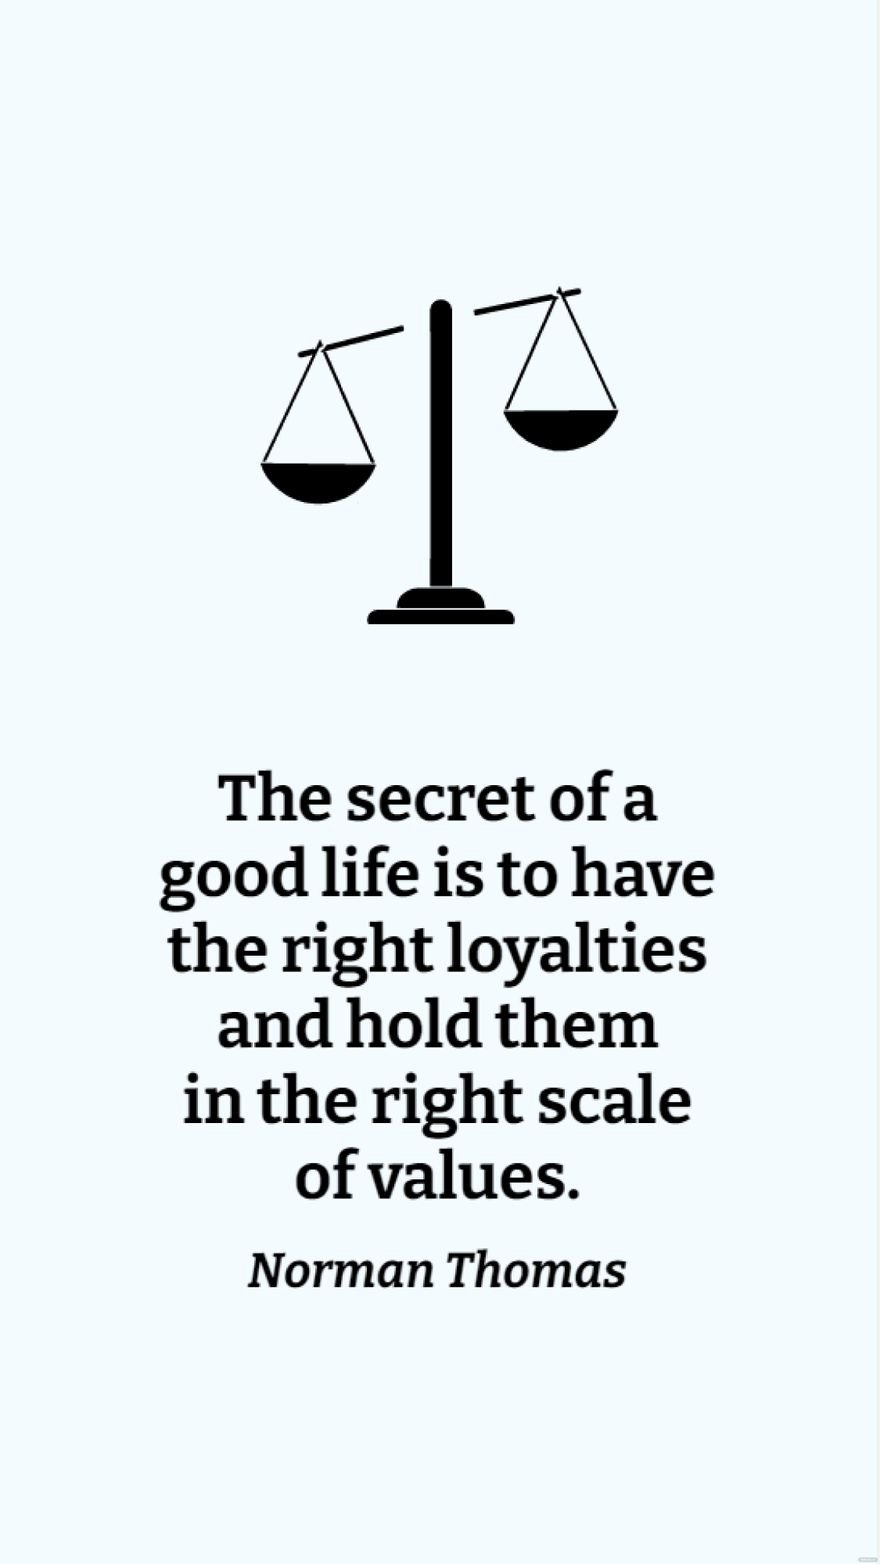 Free Norman Thomas - The secret of a good life is to have the right loyalties and hold them in the right scale of values. in JPG